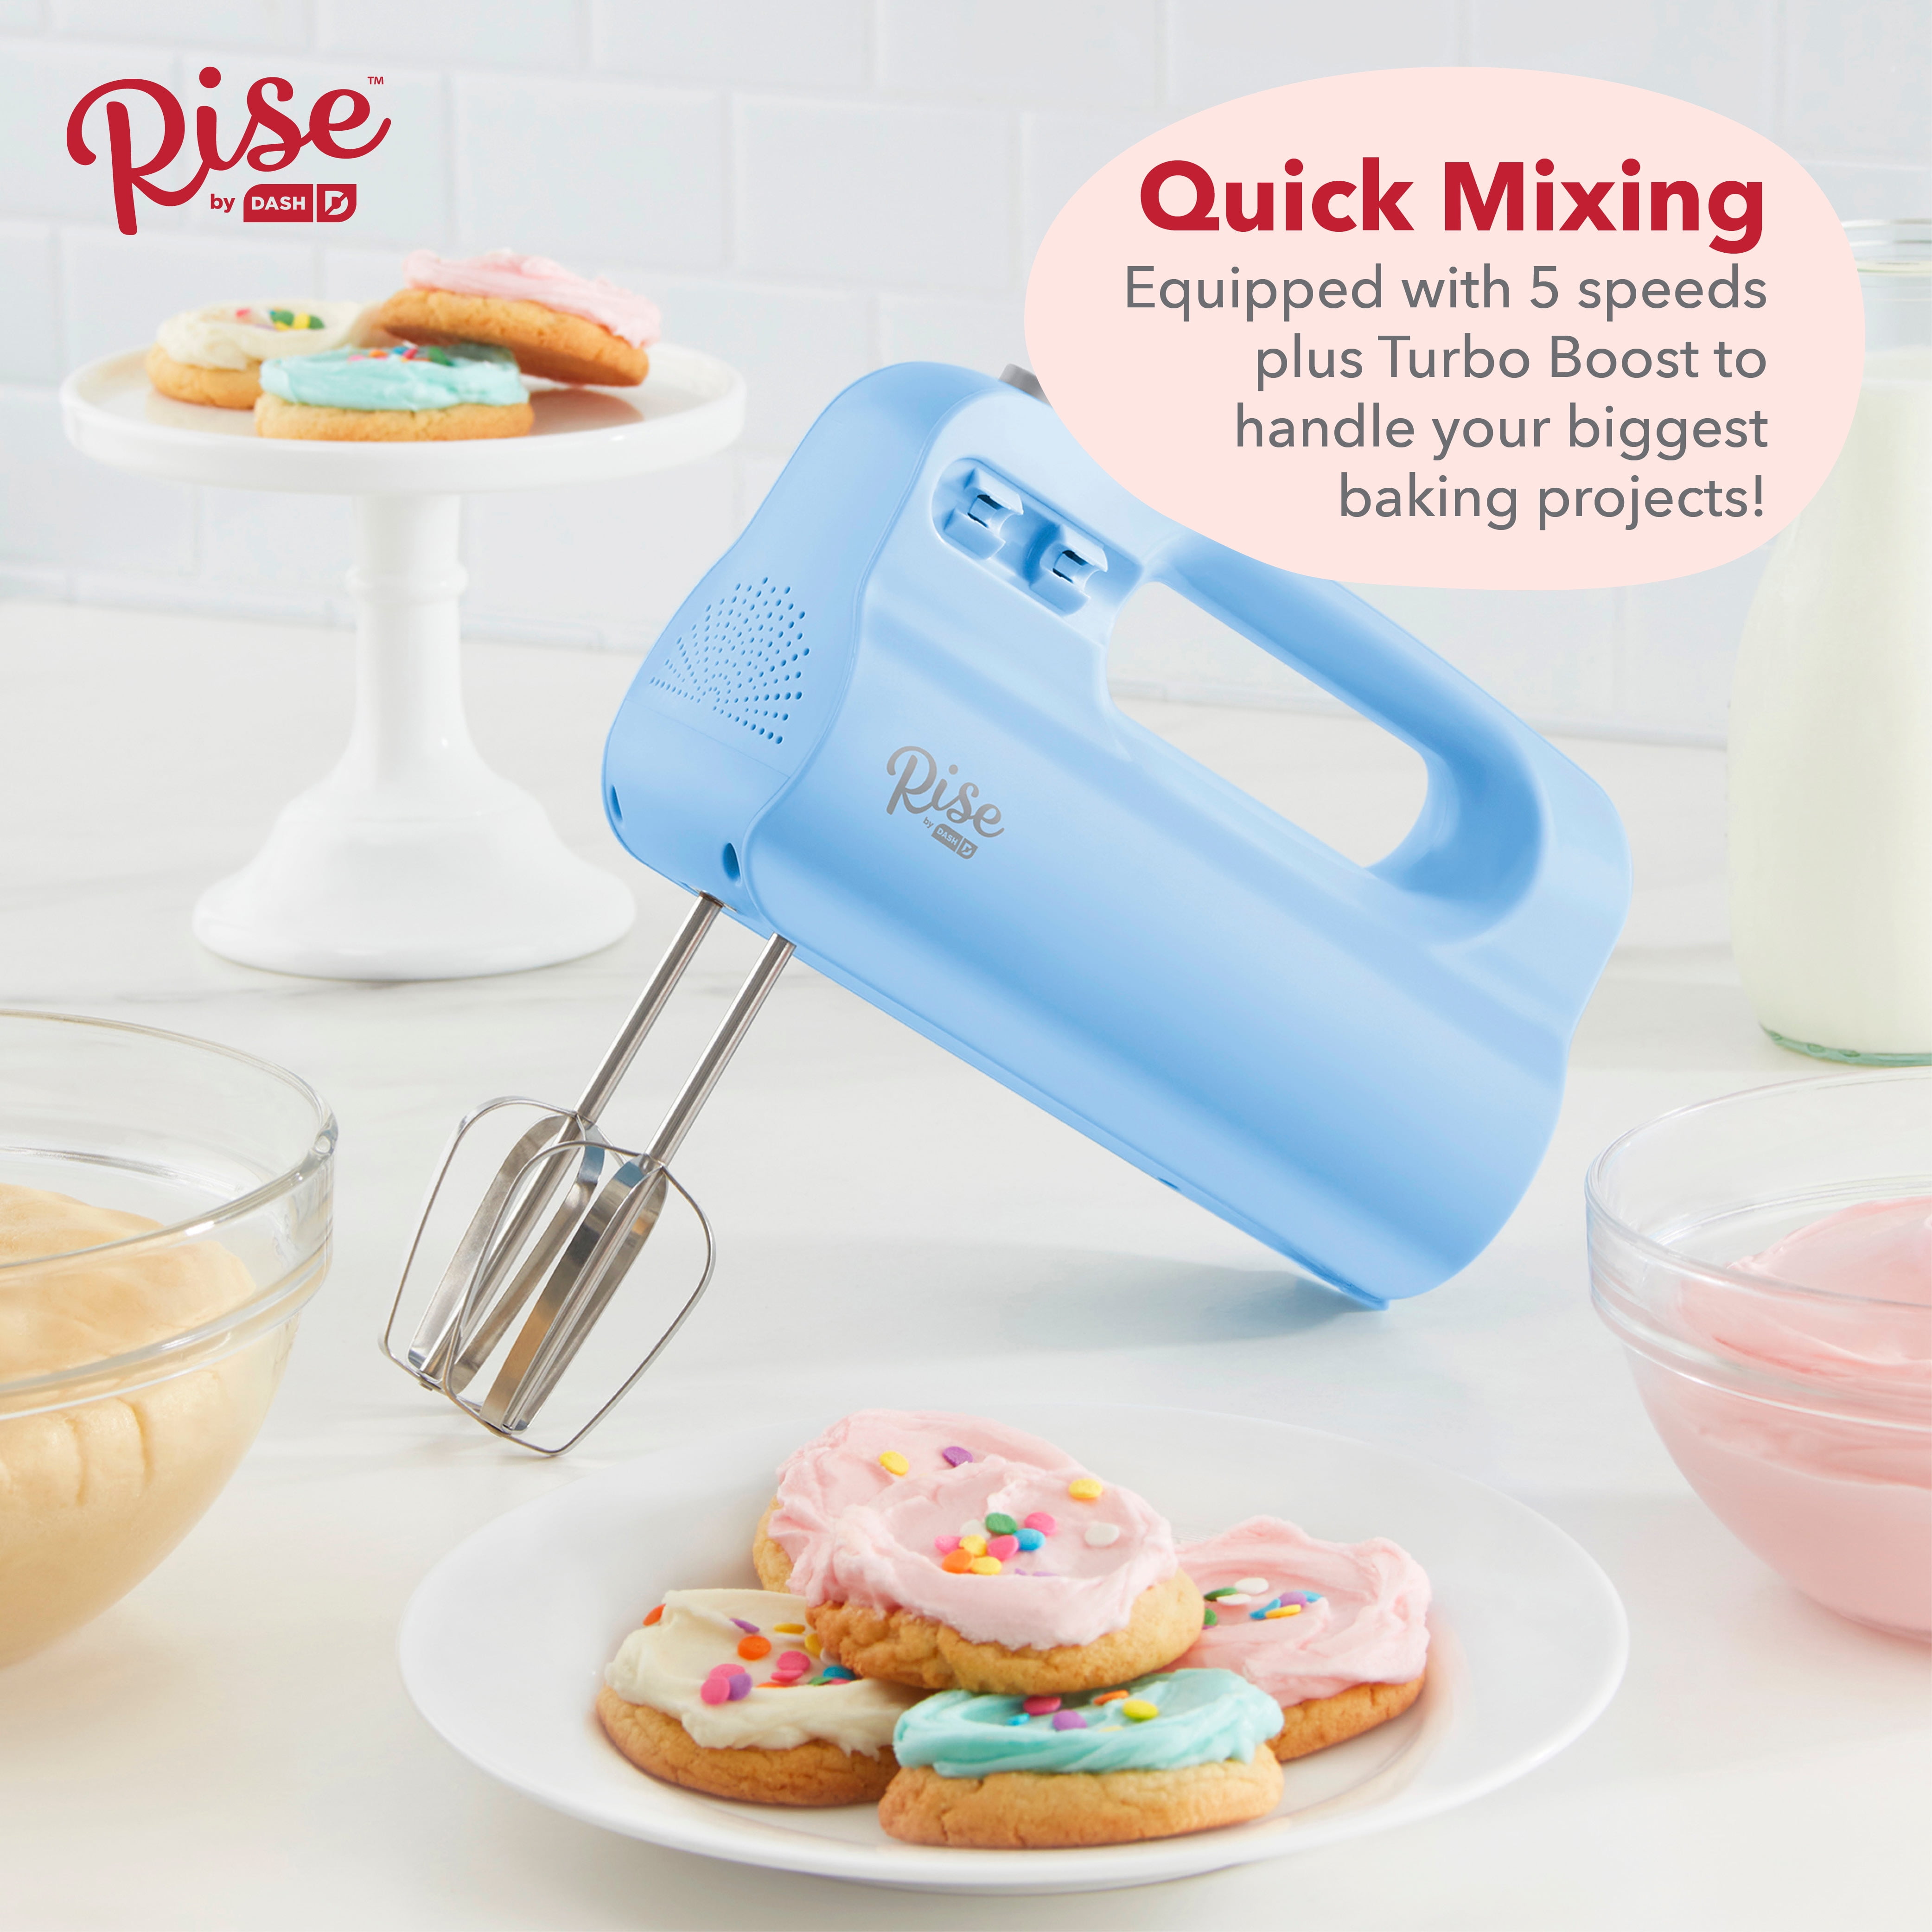  Dash SmartStore™ Compact Hand Mixer Electric for Whipping +  Mixing Cookies, Brownies, Cakes, Dough, Batters, Meringues & More, 3 Speed,  150-Watt - Aqua: Home & Kitchen